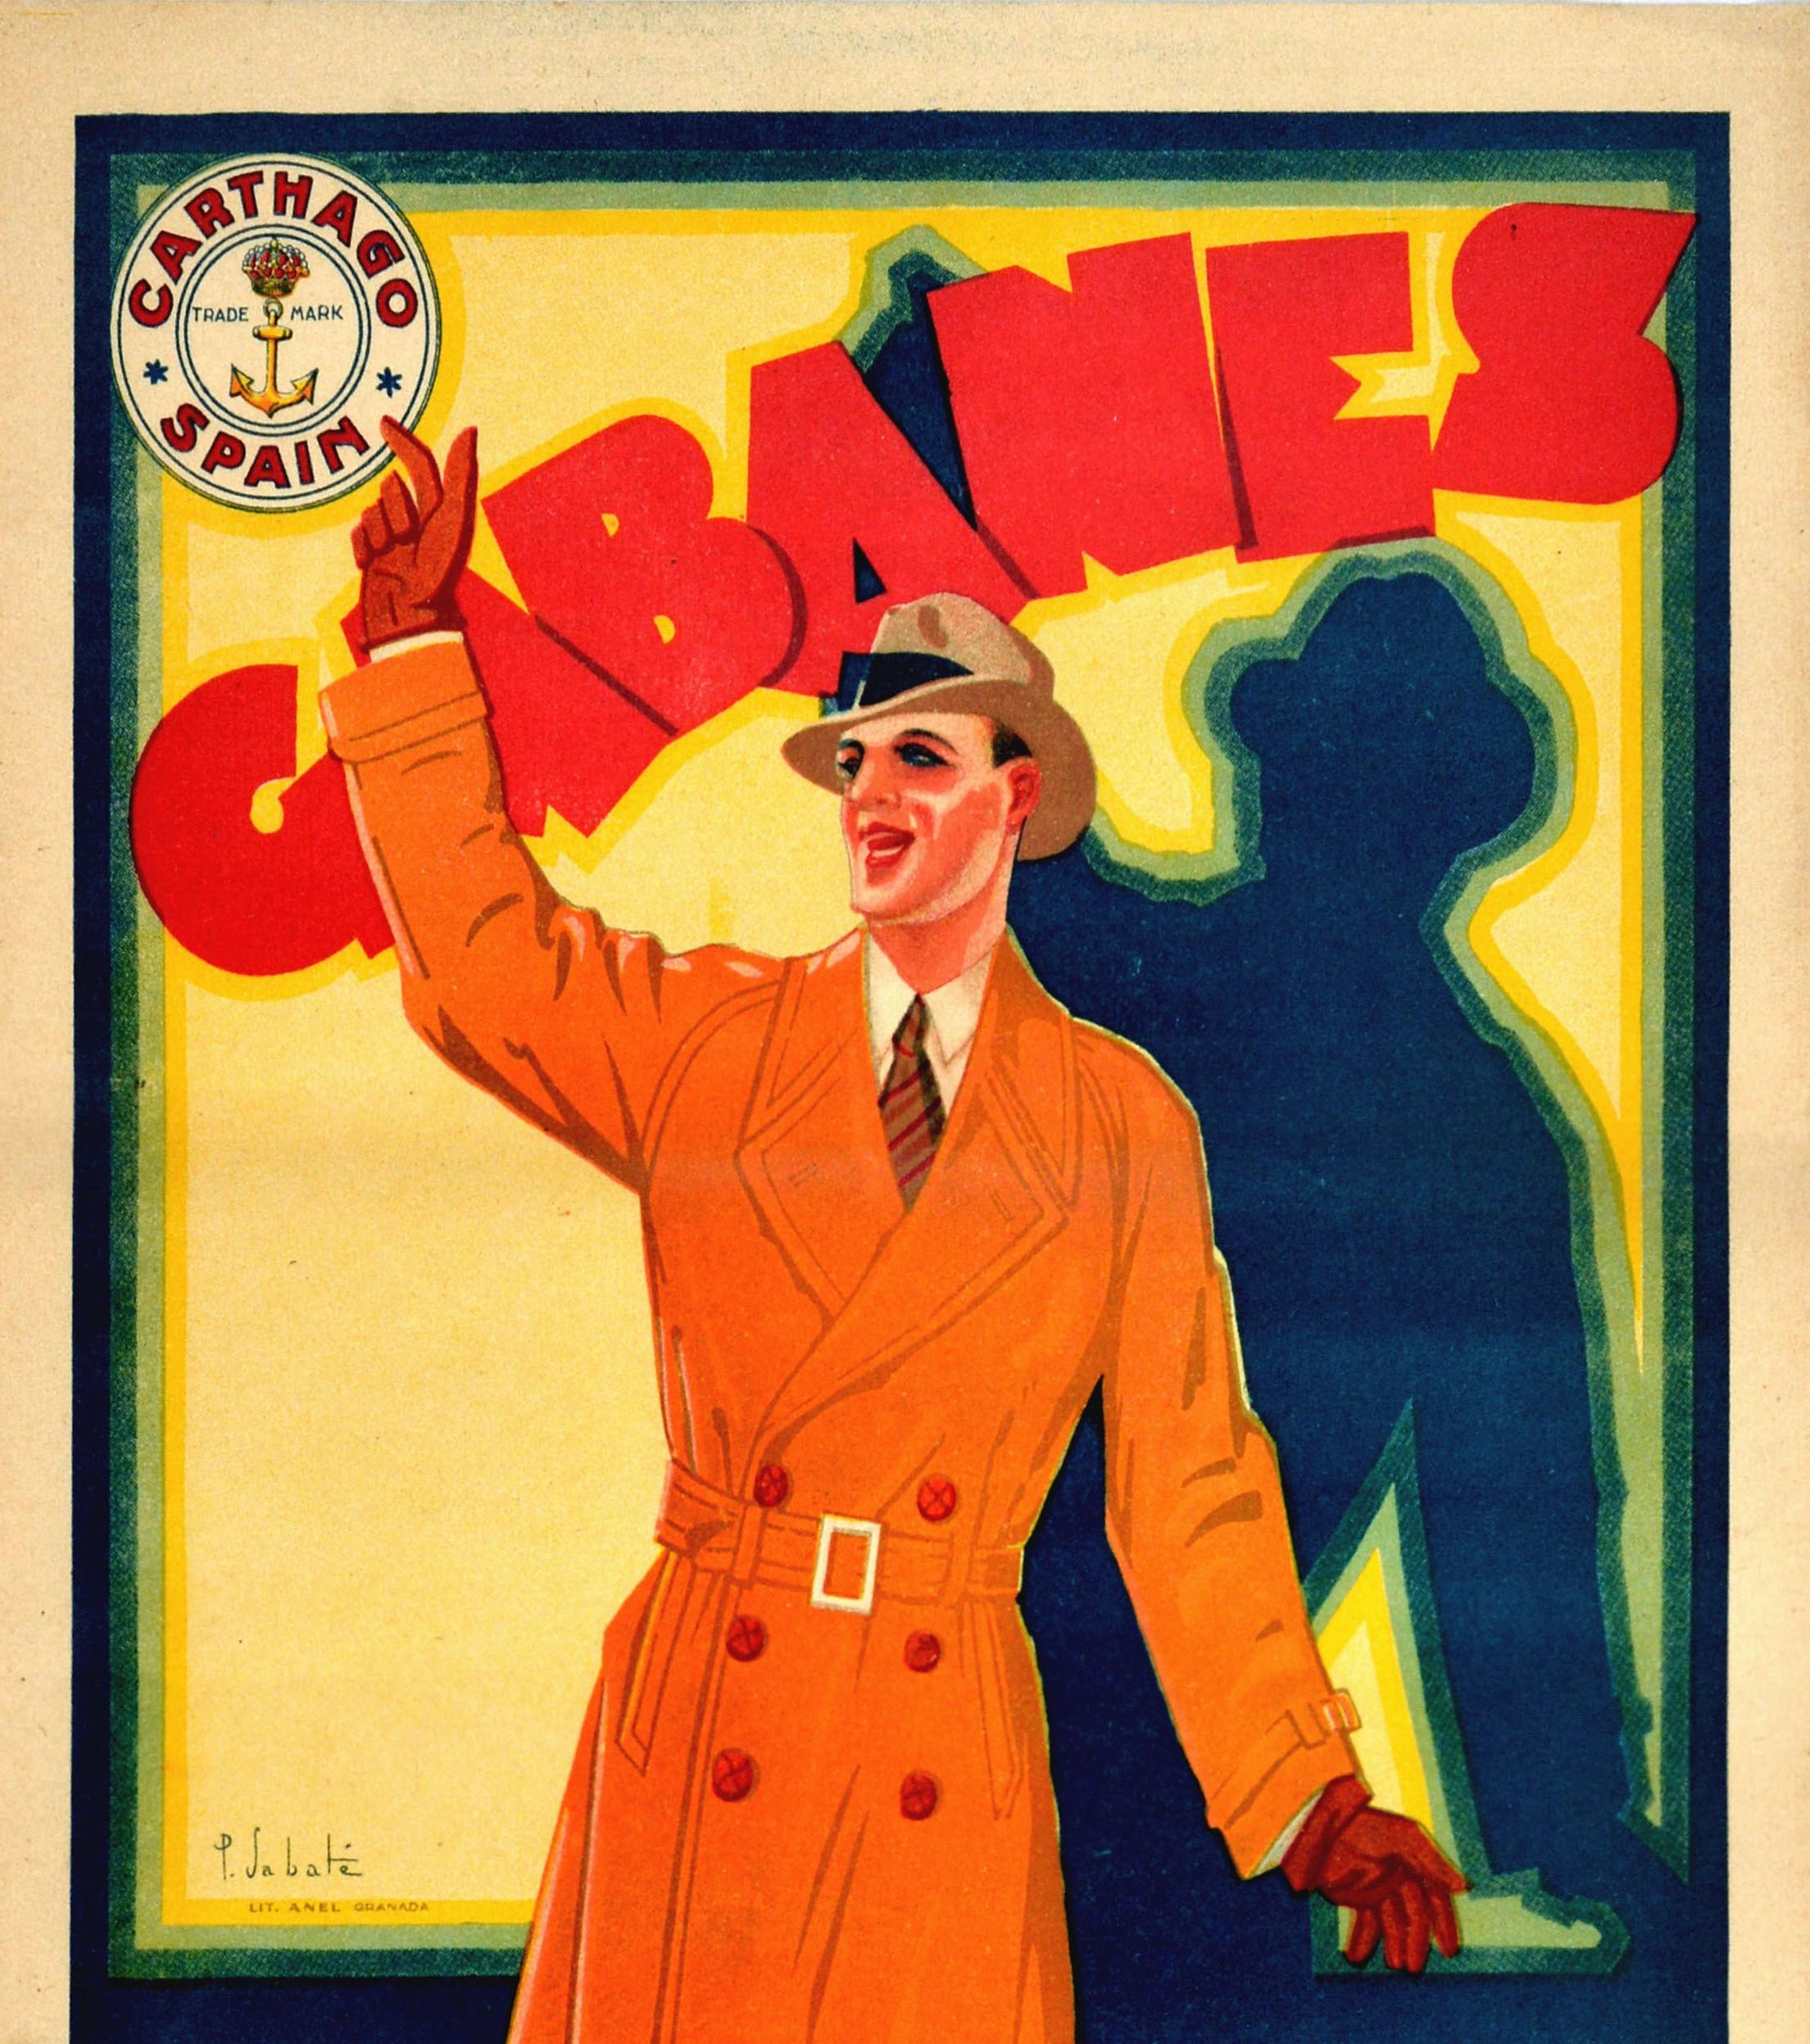 Original vintage men's fashion advertising poster for Cabanes Carthago Exposicion y venta J. Martinez Miralles La Neuva Aduaneta Alicante fedora hat retailer exhibition and sale of new styles featuring bold red Art Deco lettering behind a smartly